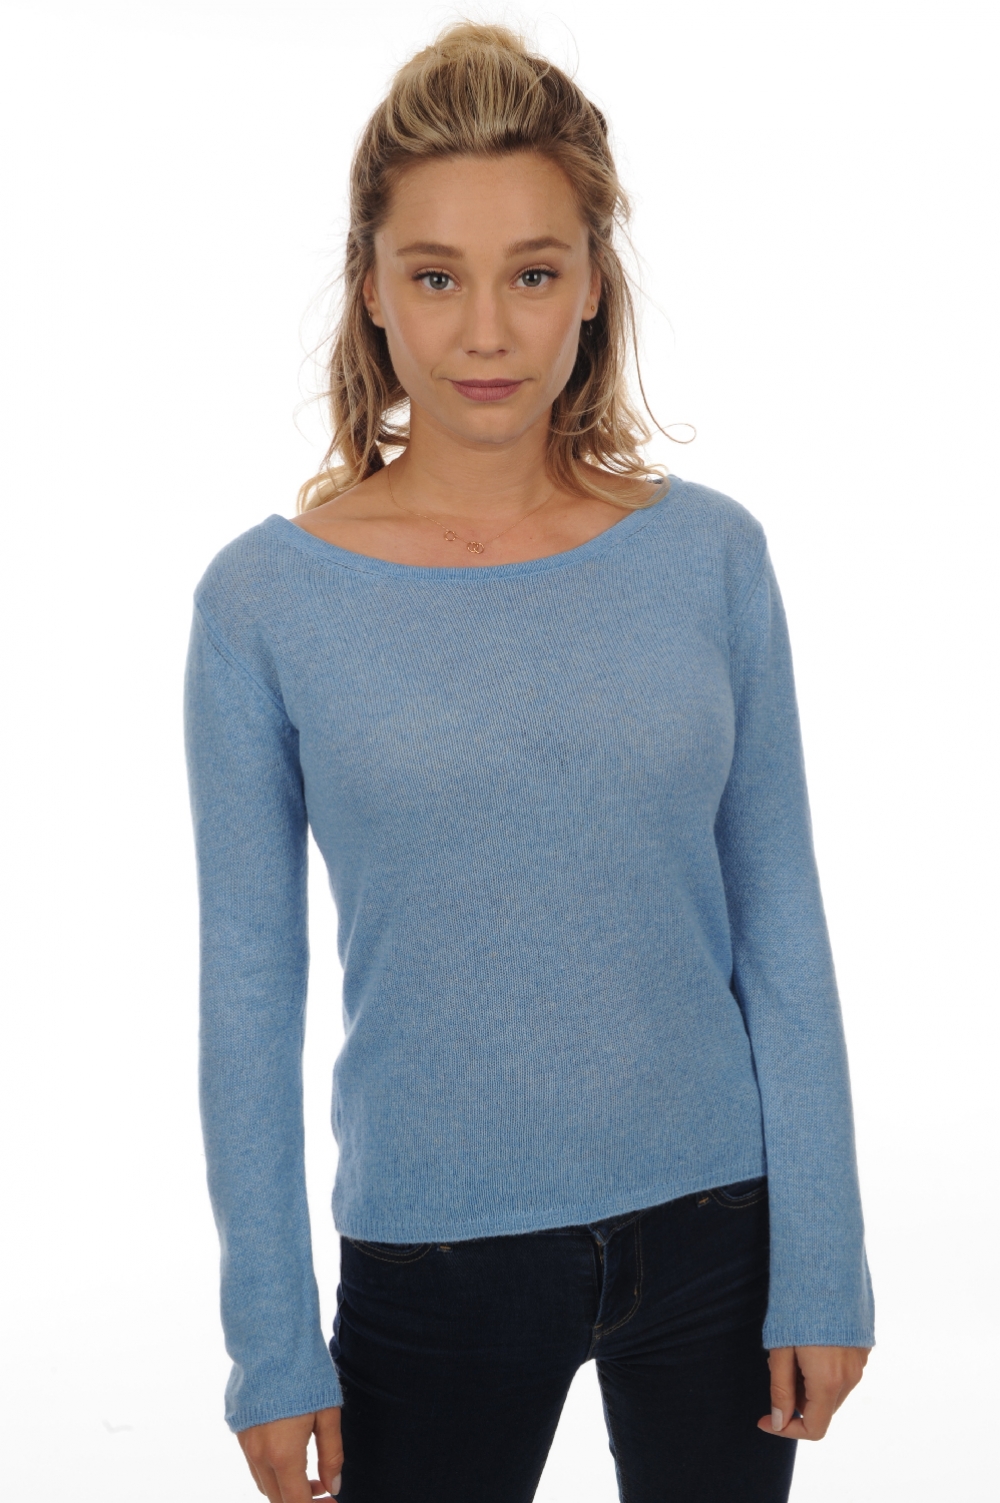 Cashmere ladies basic sweaters at low prices caleen azur blue chine 3xl